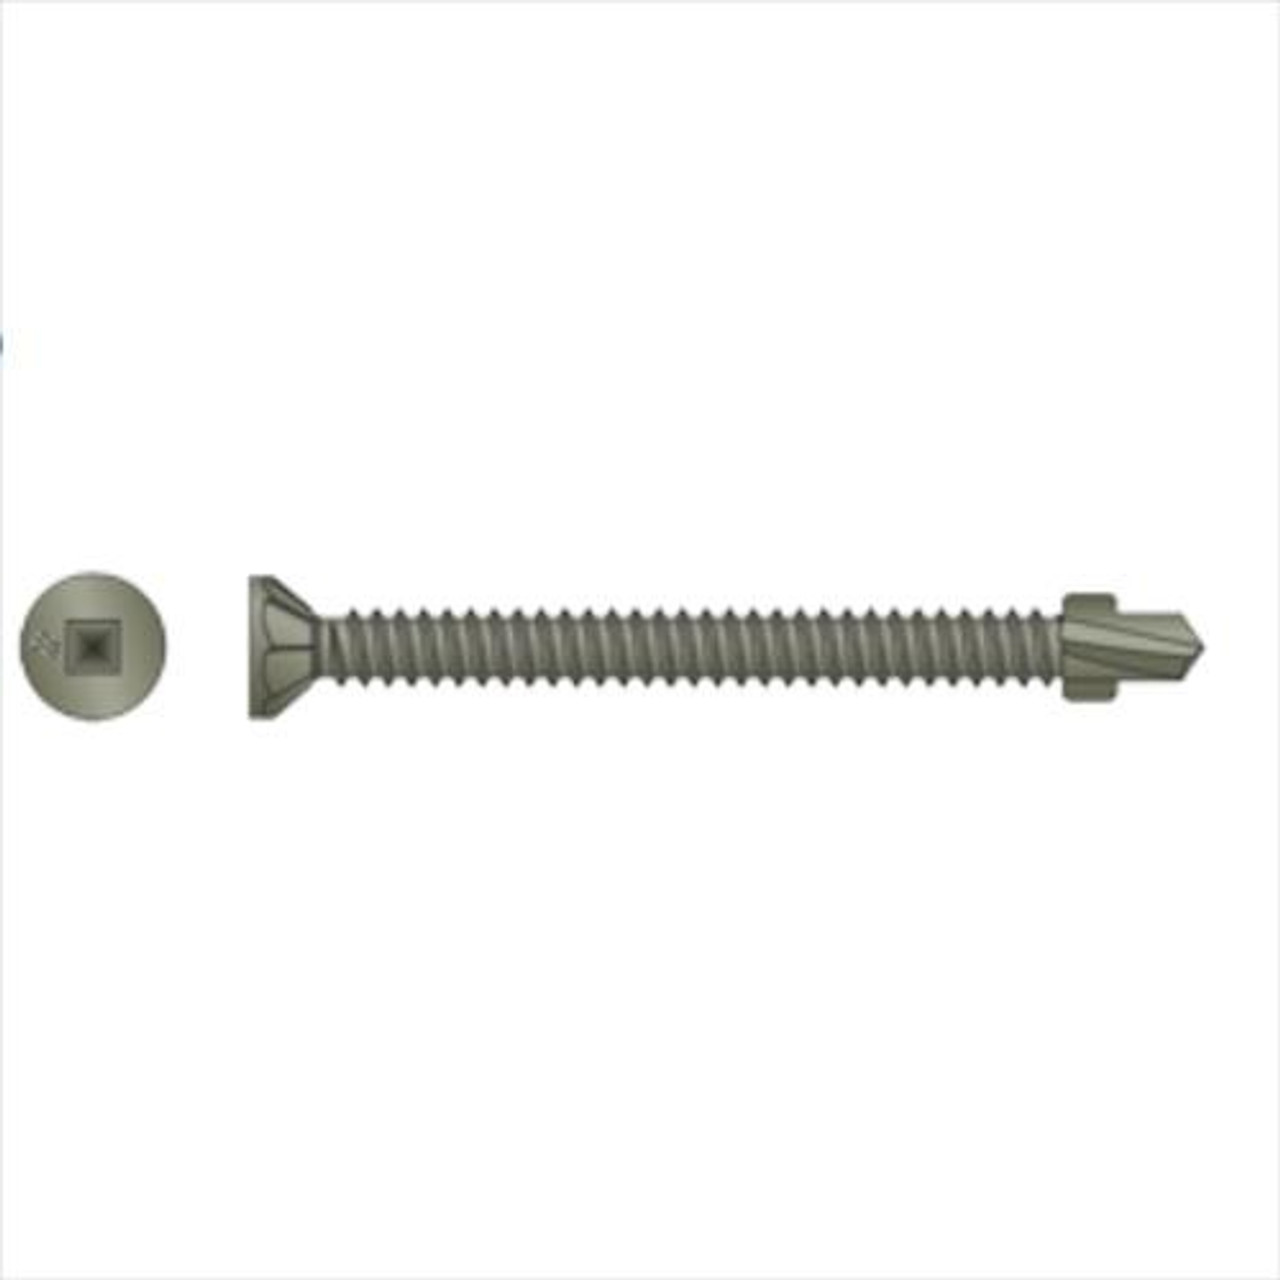 Simpson Strong-Tie CBSDQ214S #10 x 2-1/4-Inch Quick Drive Collated Screw 1M